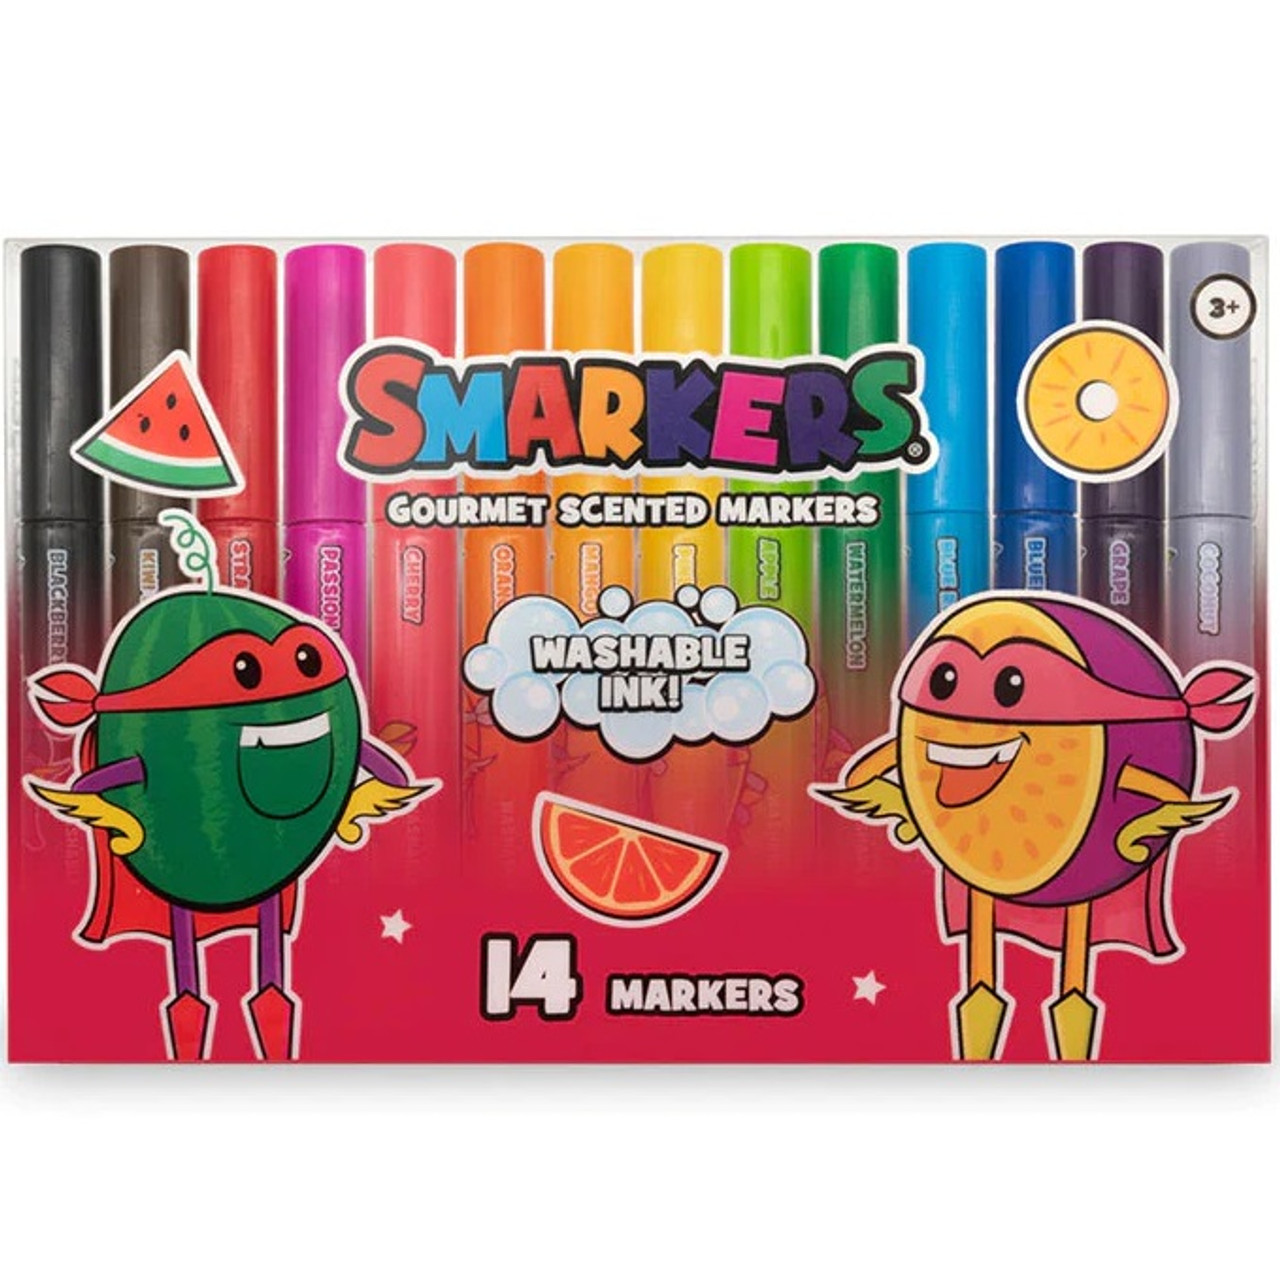 Smarkers - 14-Pack of Washable Gourmet Scented Markers 